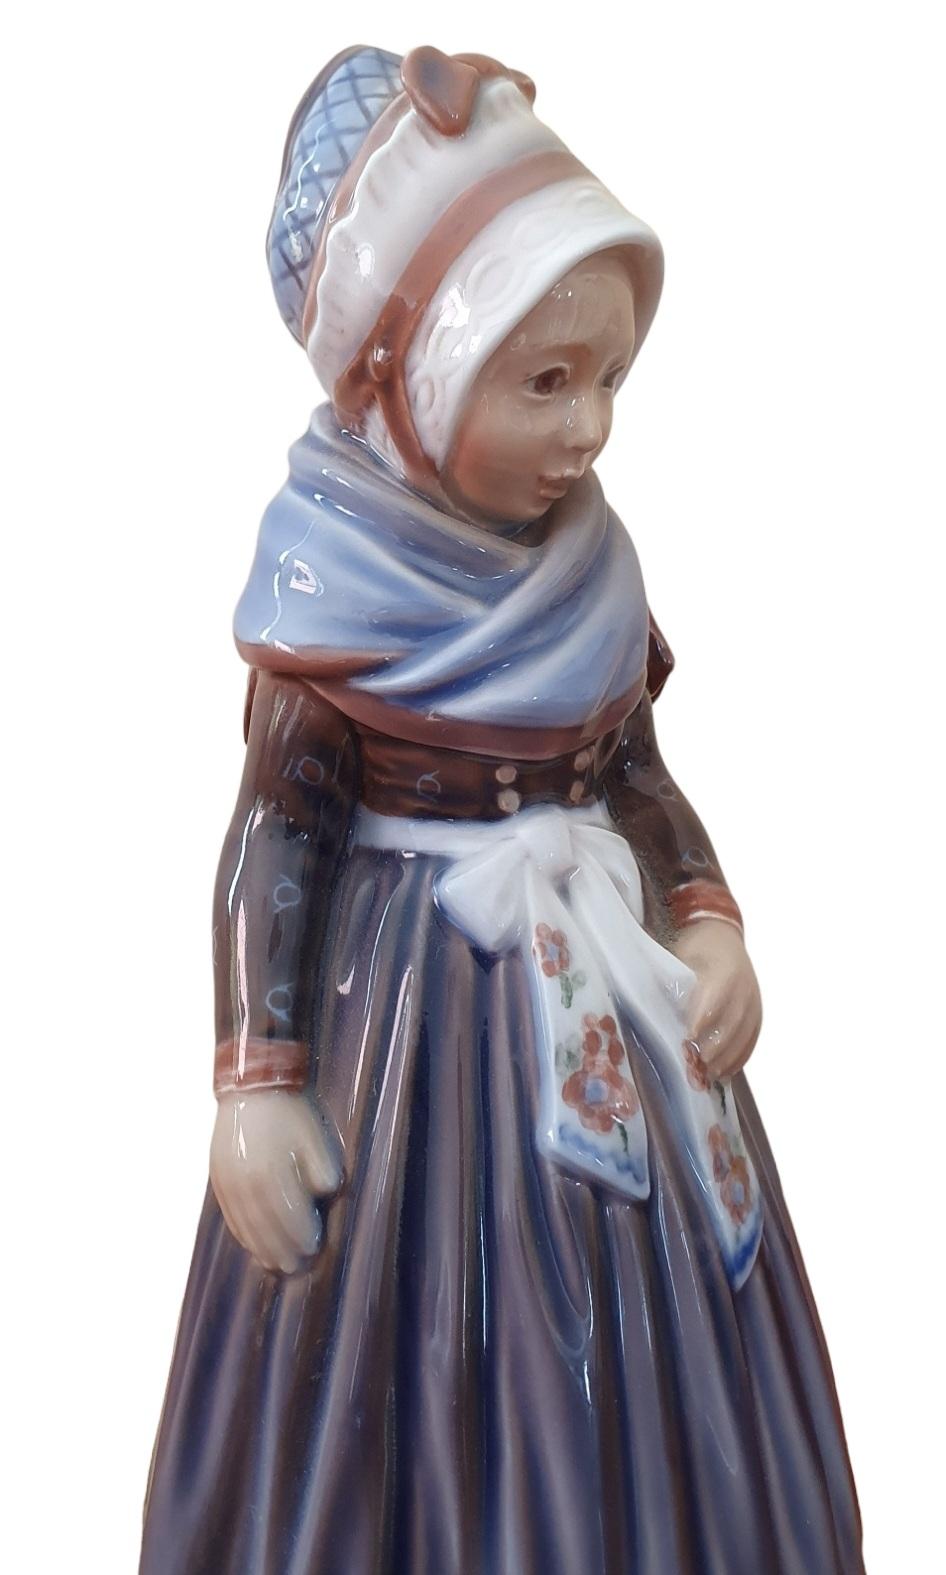 Hand-Painted 20th Century Porcelain Figurine of a Girl from Fanø  For Sale